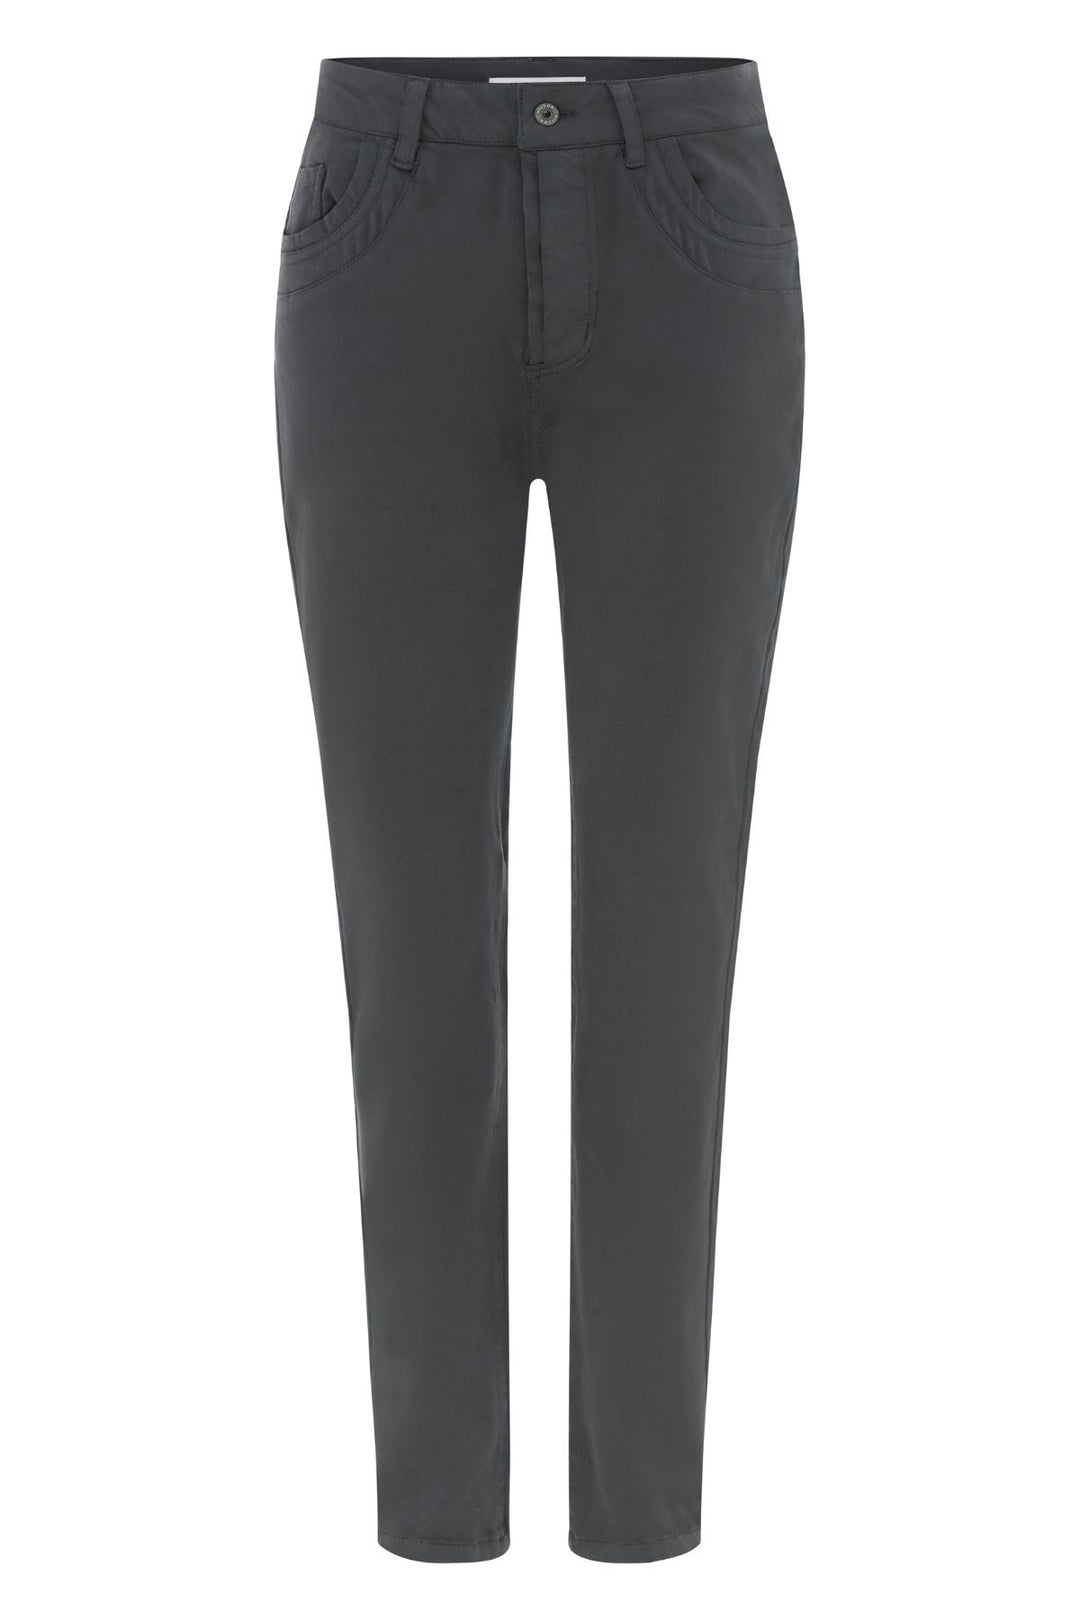 The classic Phoebe Jean by Milson, in black sand. These full-length jeans feature a mid-rise and cotton construction for superior comfort with a button fly. Upgrade your everyday style with this timeless look.  Brand : Milson Style Code : ML6150 Colour : Black Sand Fabric : 98% Cotton 5% Spandex Wash separately, cold hand wash